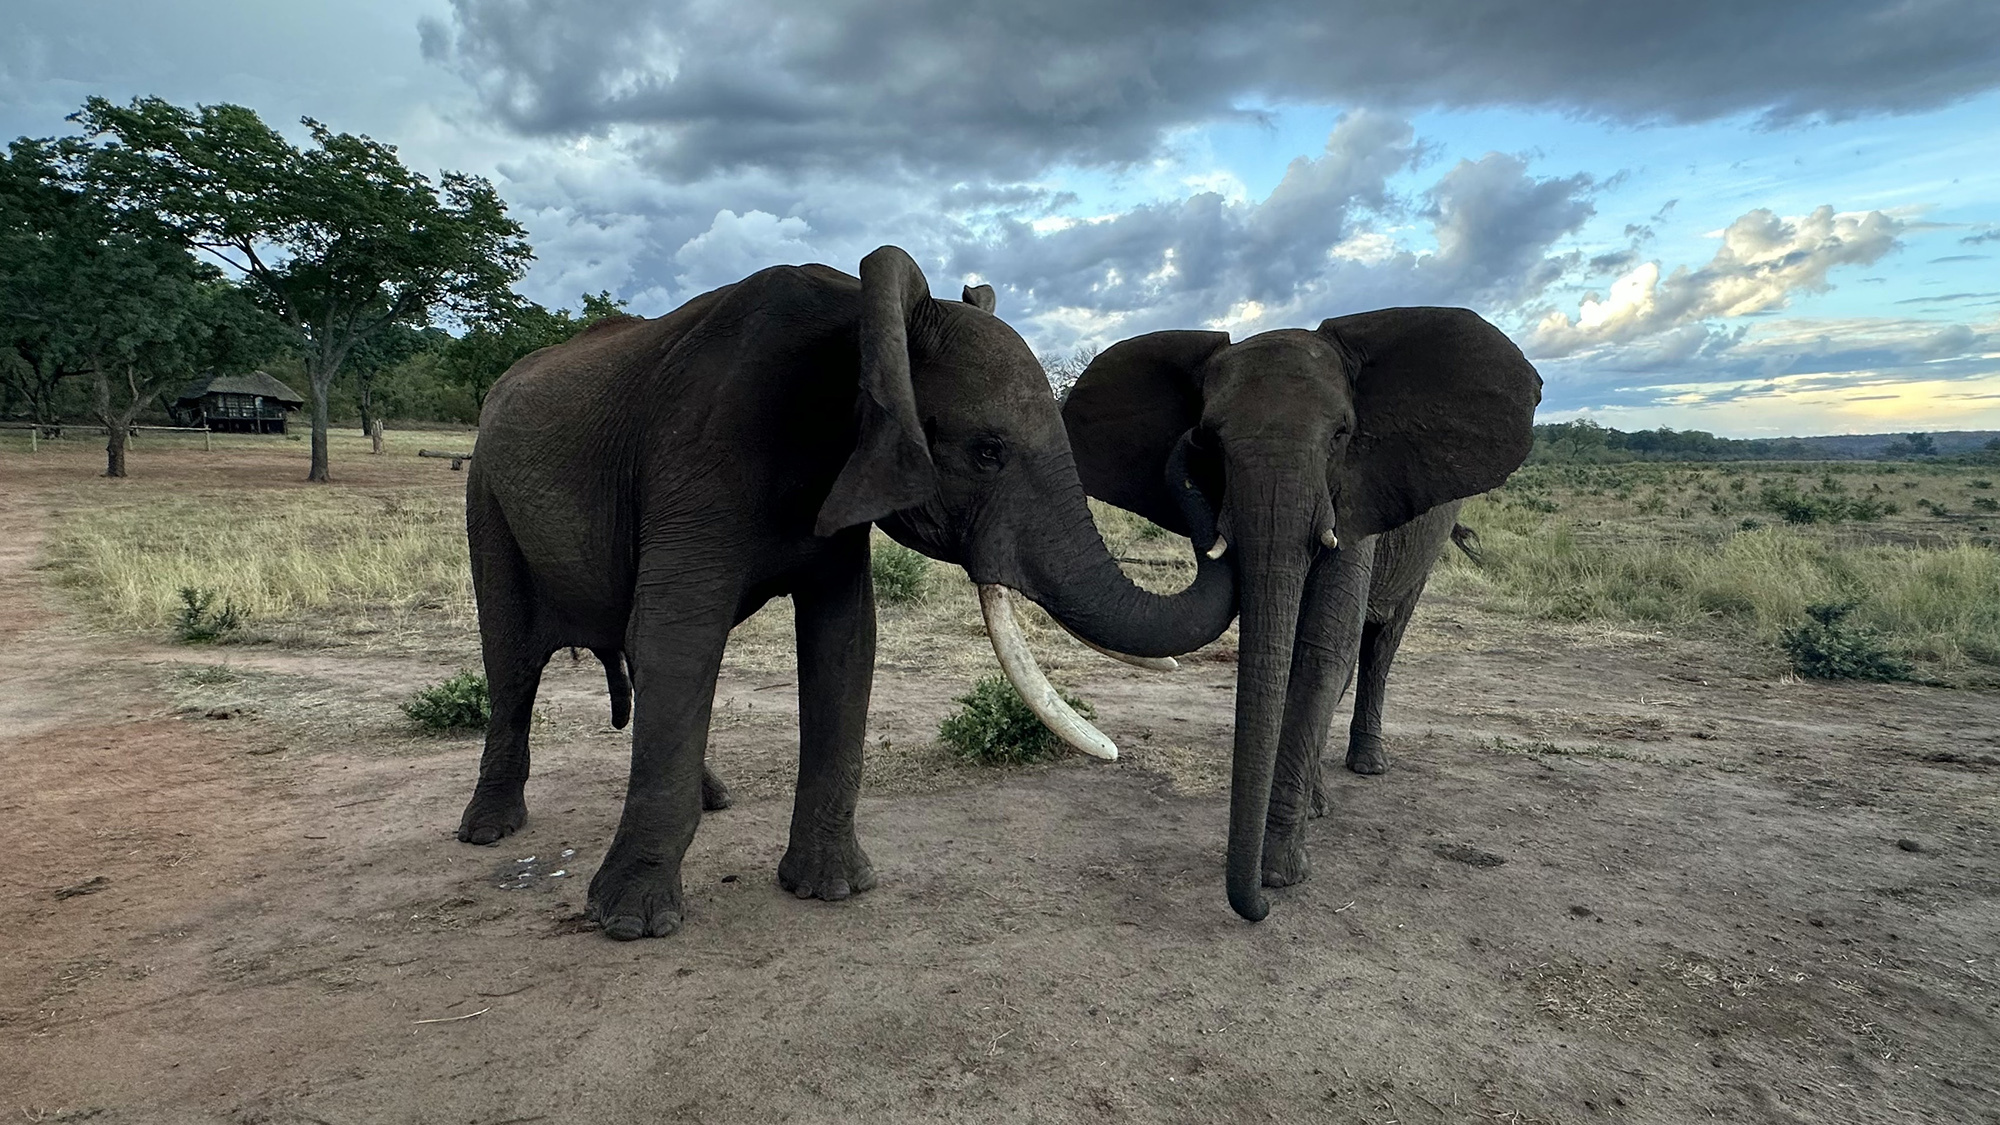 A male African elephant named Doma and a female named Kariba greet one another. Doma touches Kariba´s temporal gland while flapping his ears and Kariba holds her ears spread.